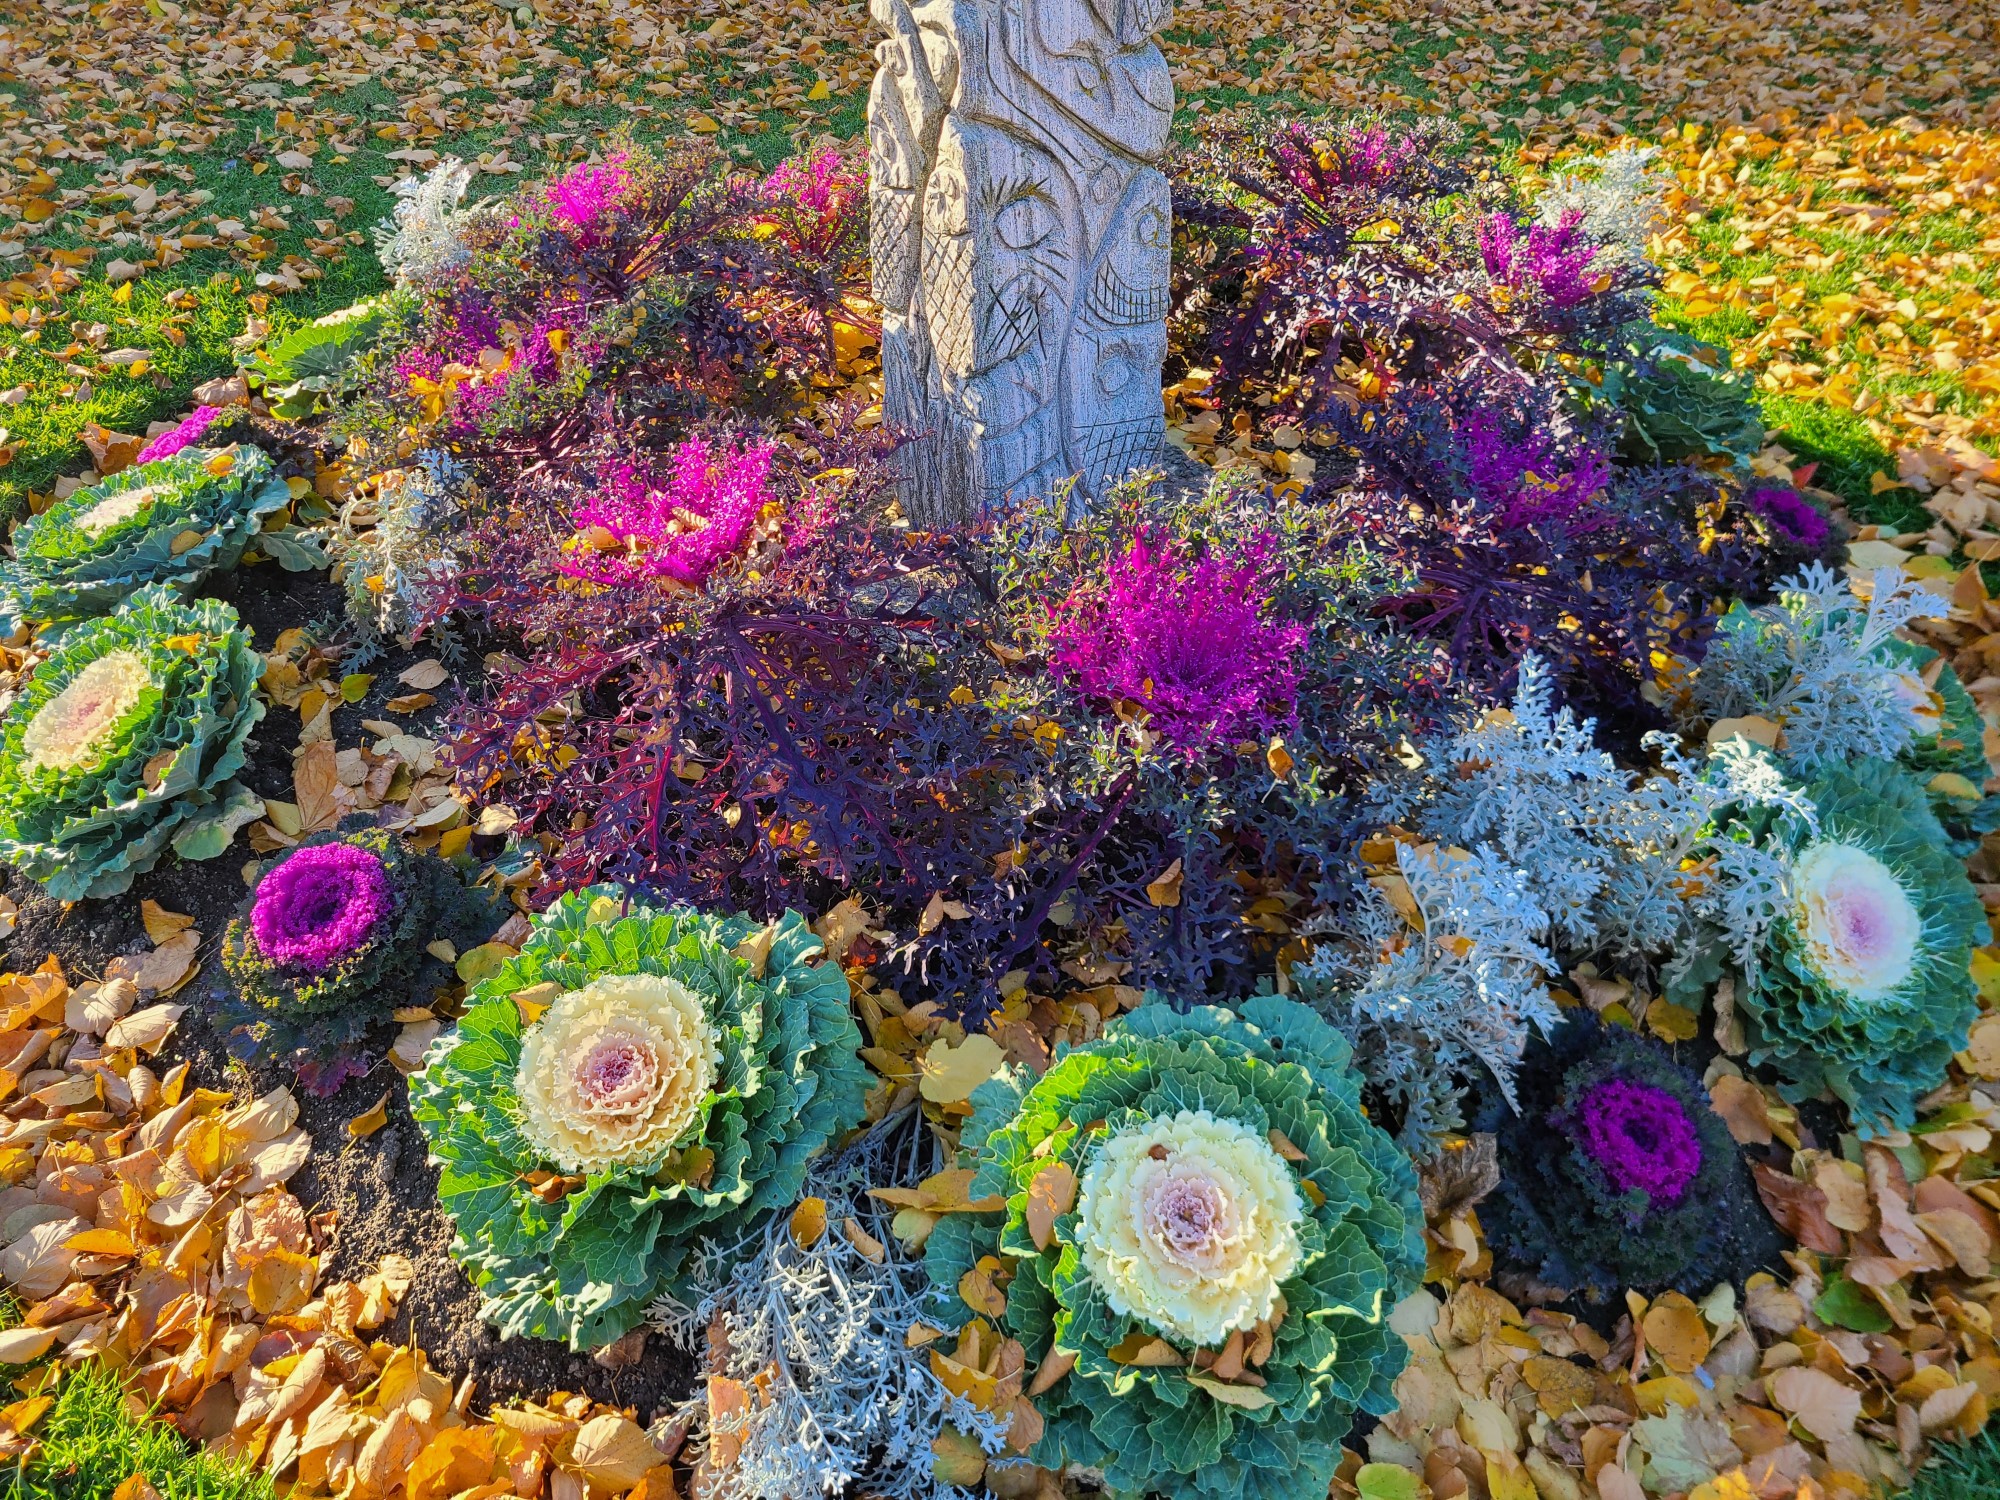 Amazing colors of ornamental cabbage in High Park, Toronto in November